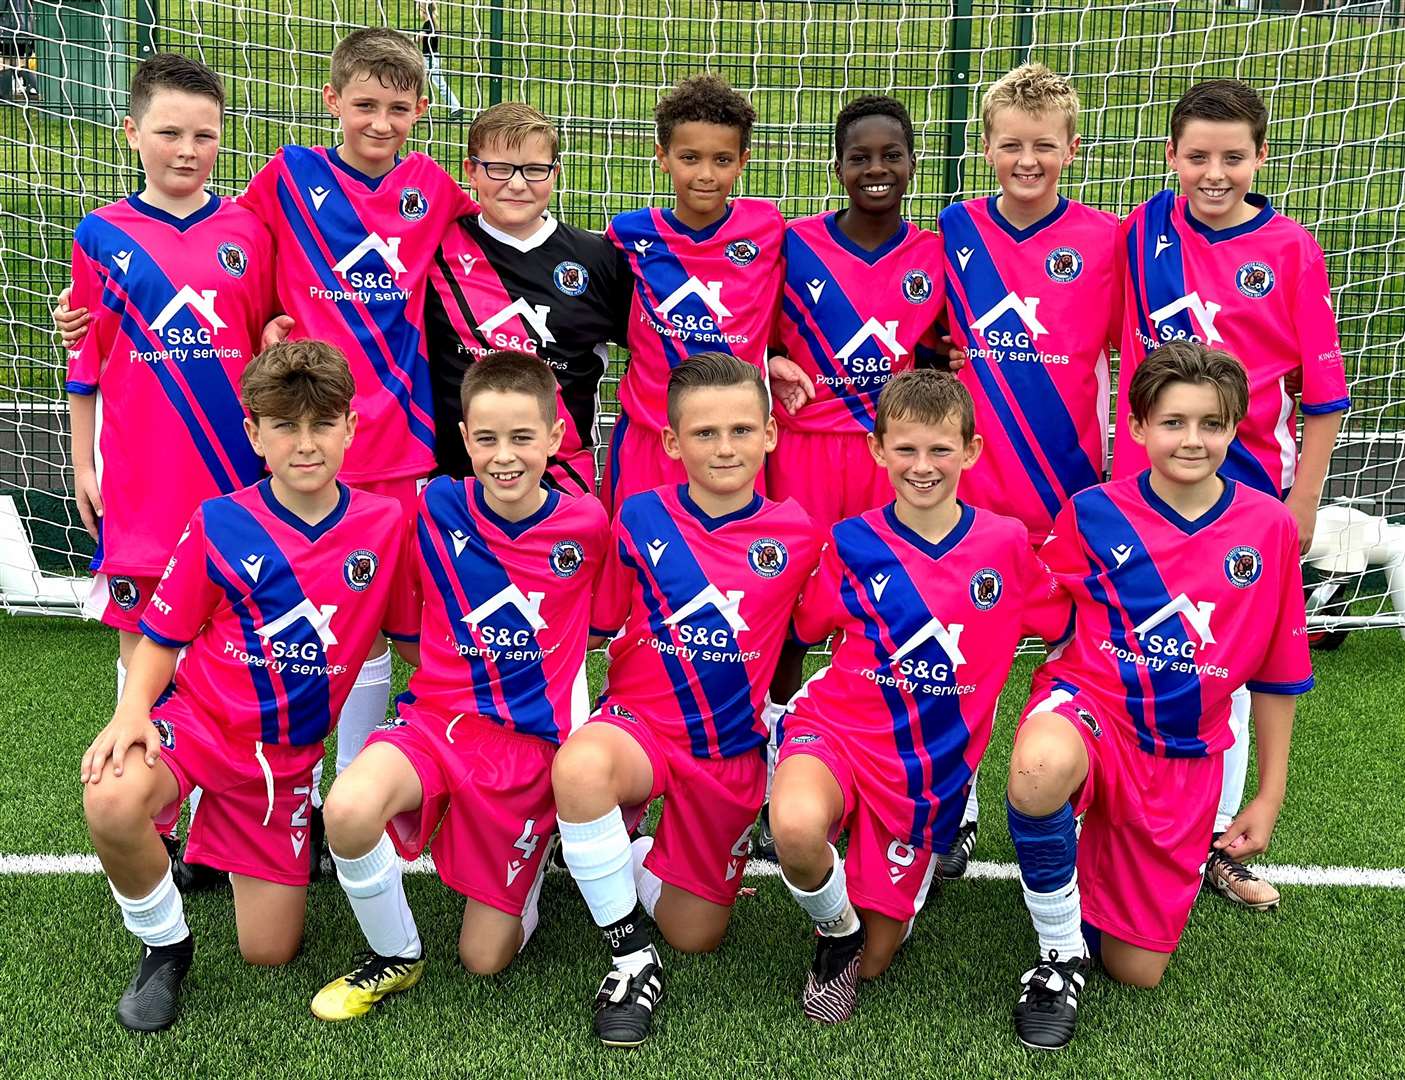 Bearsted under-12s have been the class of the field this season